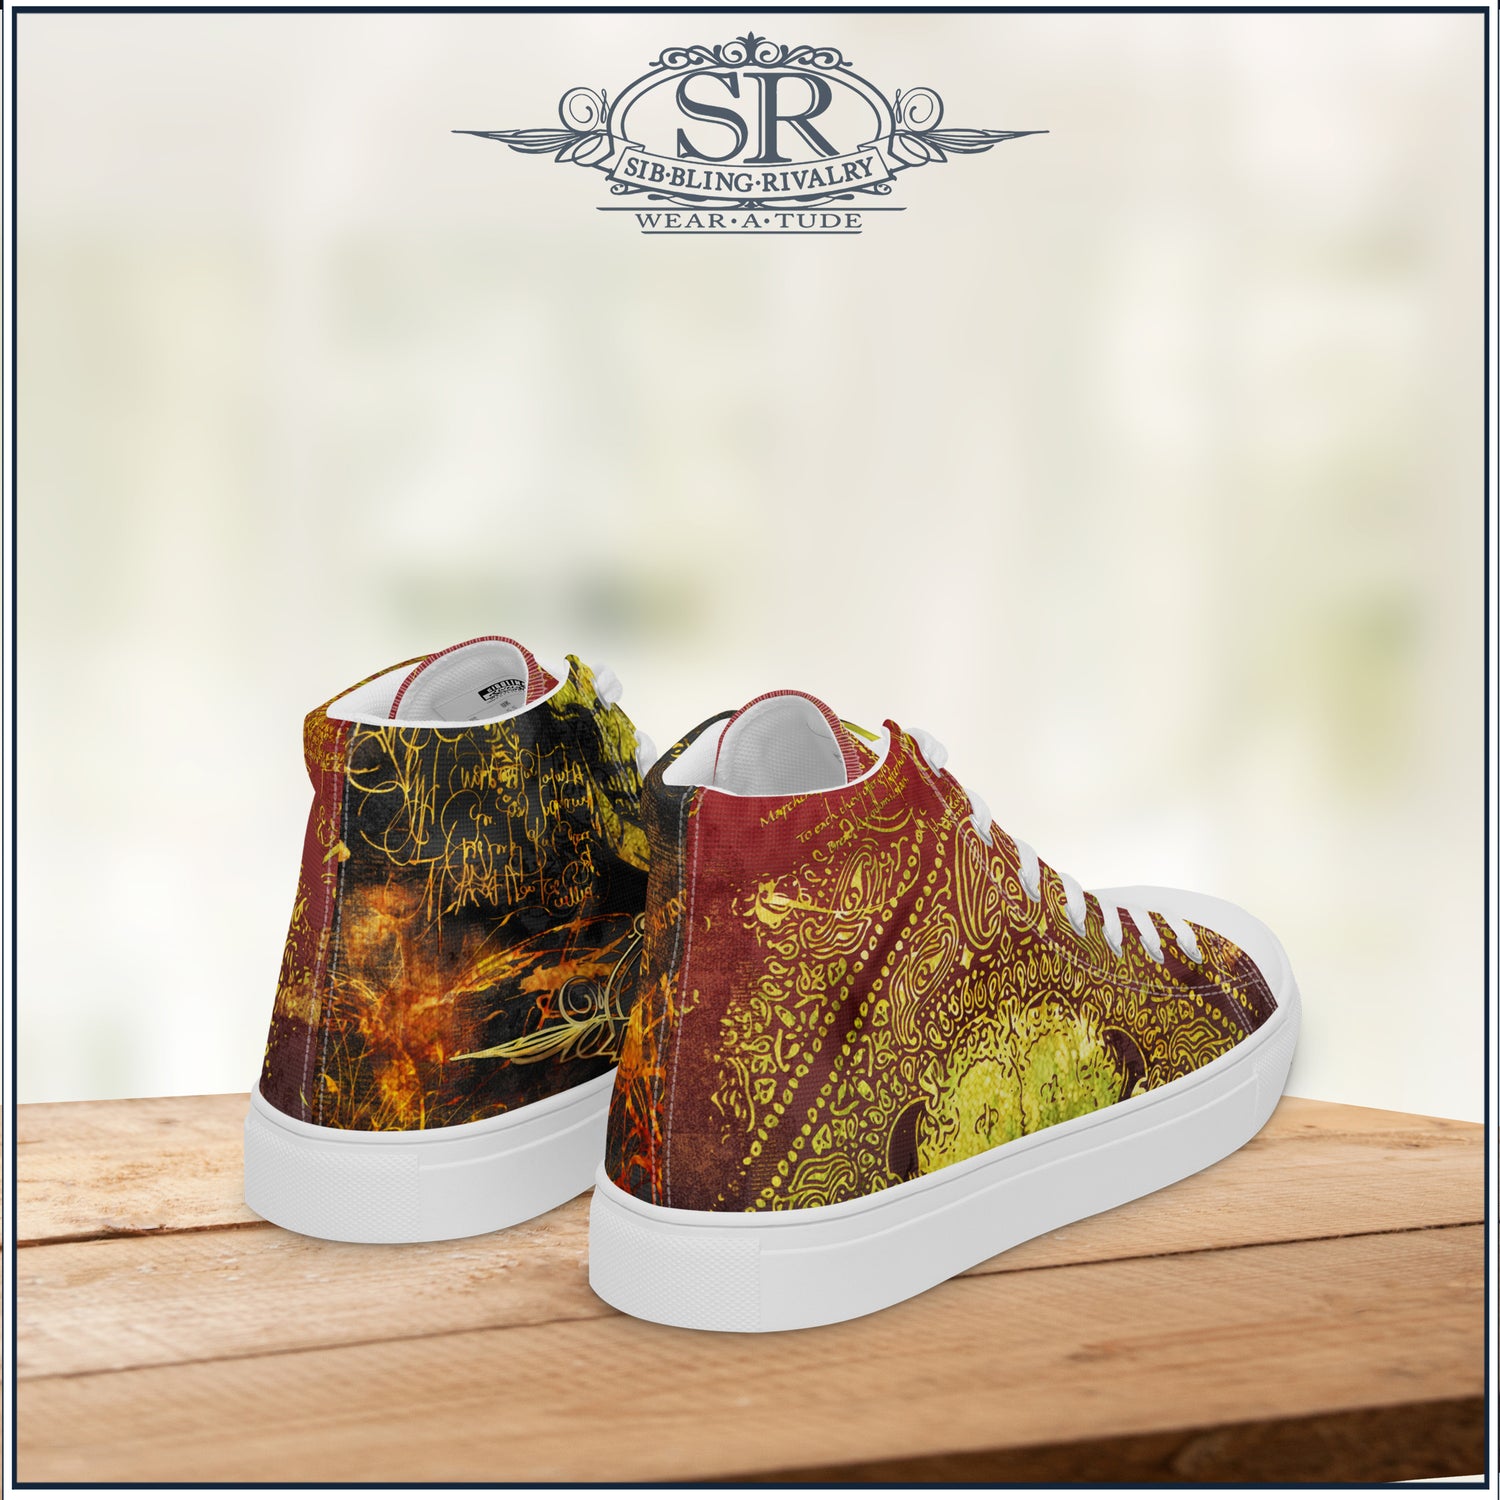 Rusted Reaper mens high top shoes with a vintage grunge feel for the Rock Star. Bold footwear with a distinctive urban style, created by Canadian entrepreneurs